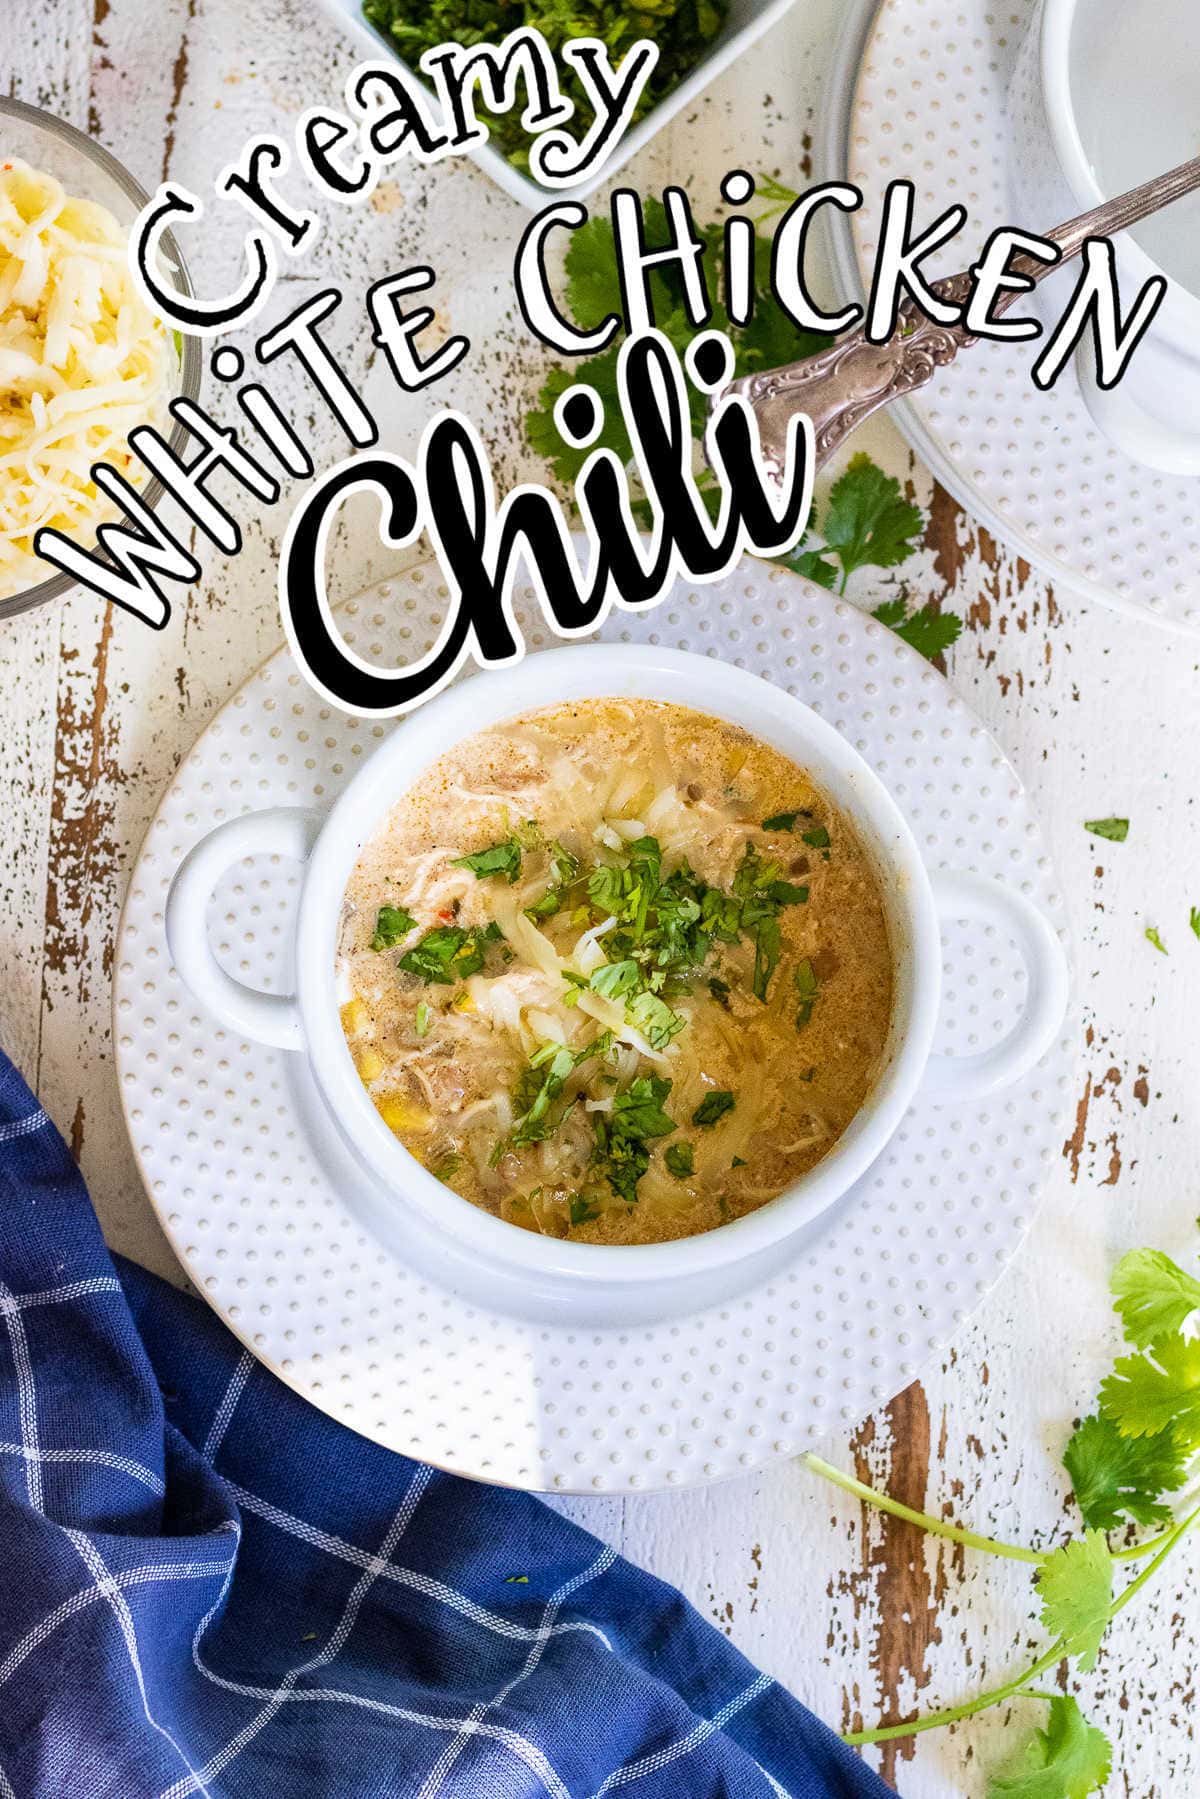 Bowl of chicken chili on a table. Title text overlay.